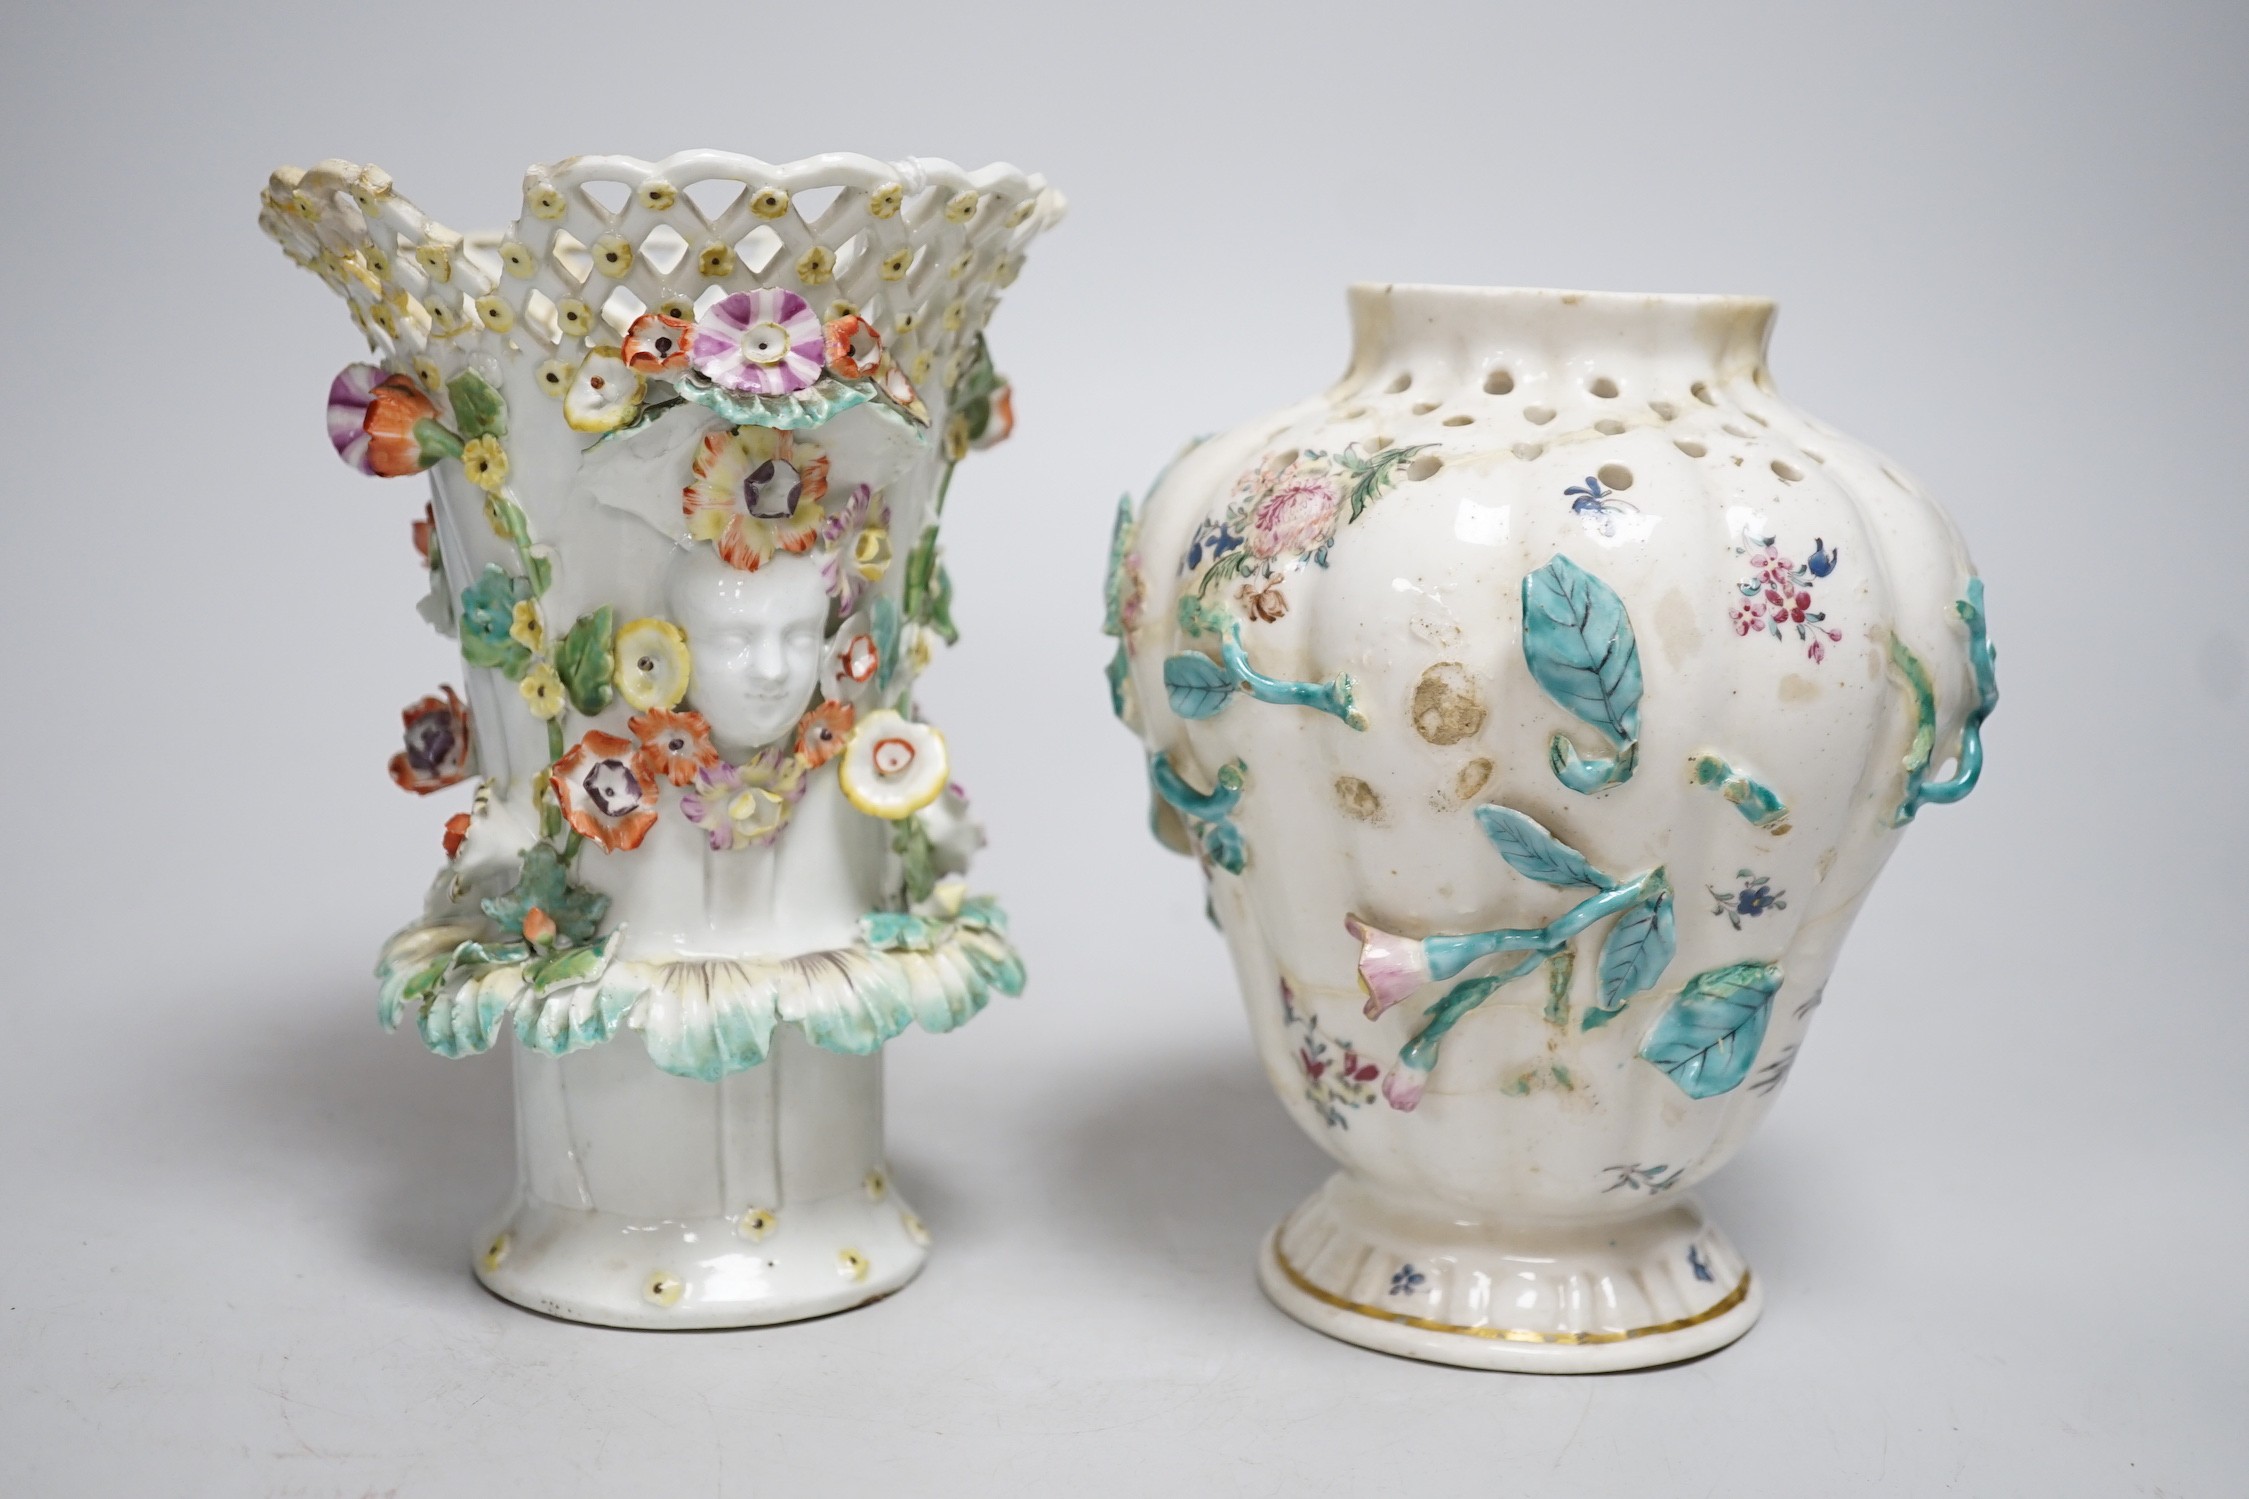 An 18th century Chelsea pot pourri vase, red anchor period, encrusted and painted with leaves and flowers and a Bow frill vase with mask heads encrusted with flowers. Tallest 16.5cm